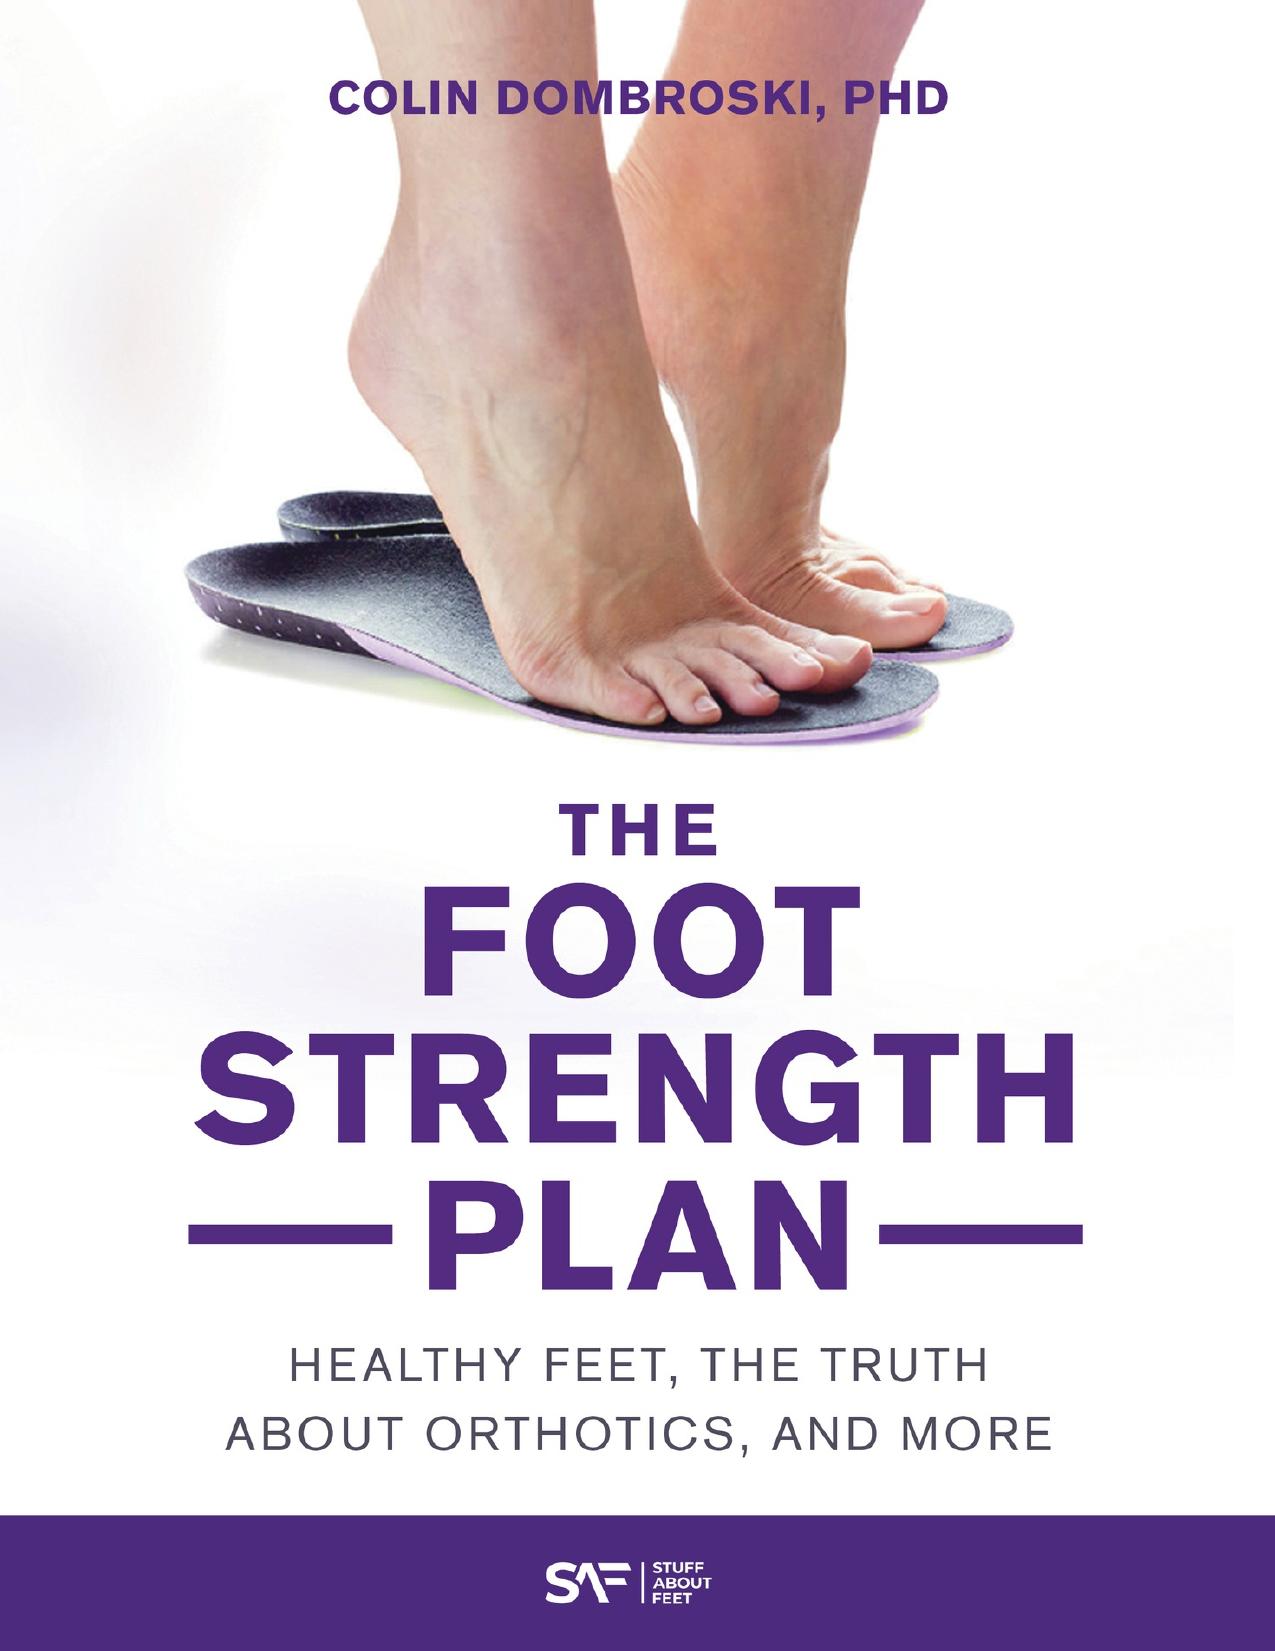 The Foot Strength Plan: Healthy Feet, the Truth About Orthotics, and More